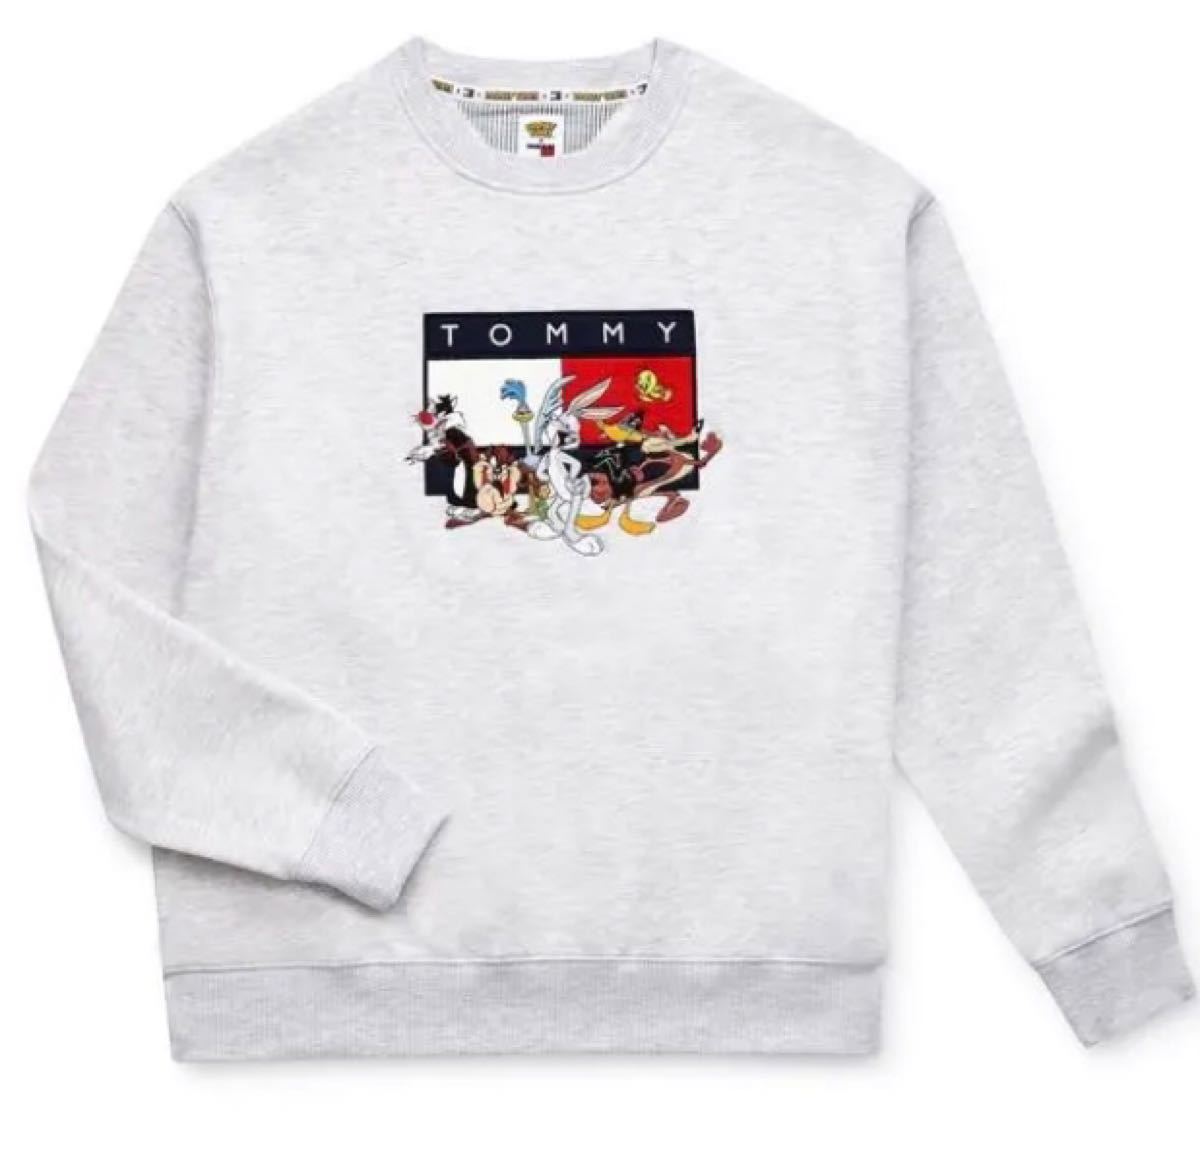 PayPayフリマ｜海外限定 tommy jeans×looney tunes ロゴスウェット